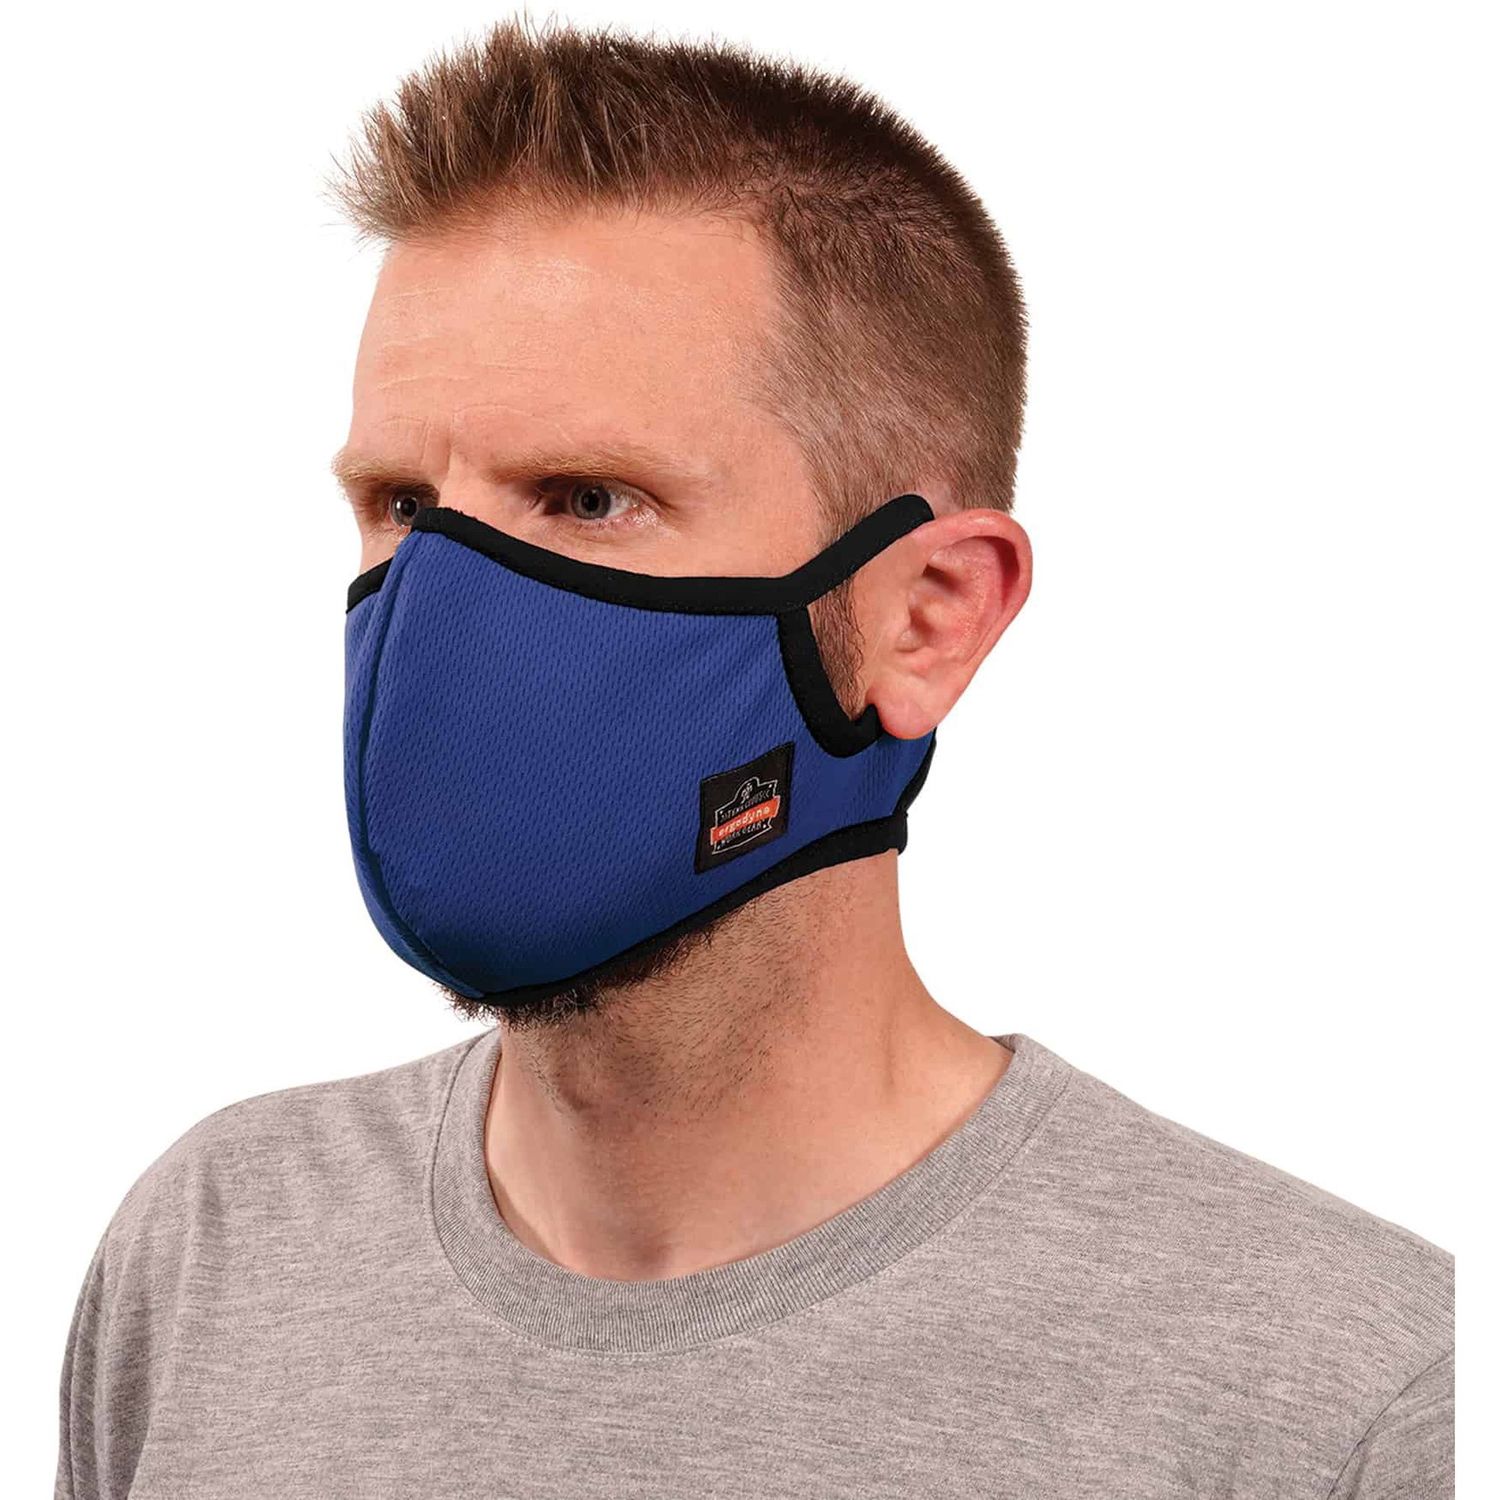 8802F(x) L/XL Blue Contoured Face Mask with Filter Breathable, Adjustable Nose Clip, Adjustable Ear Loop, Anti-odor, Antimicrobial, Machine Washable, Reusable, Quick Drying, Large/Extra Large Size